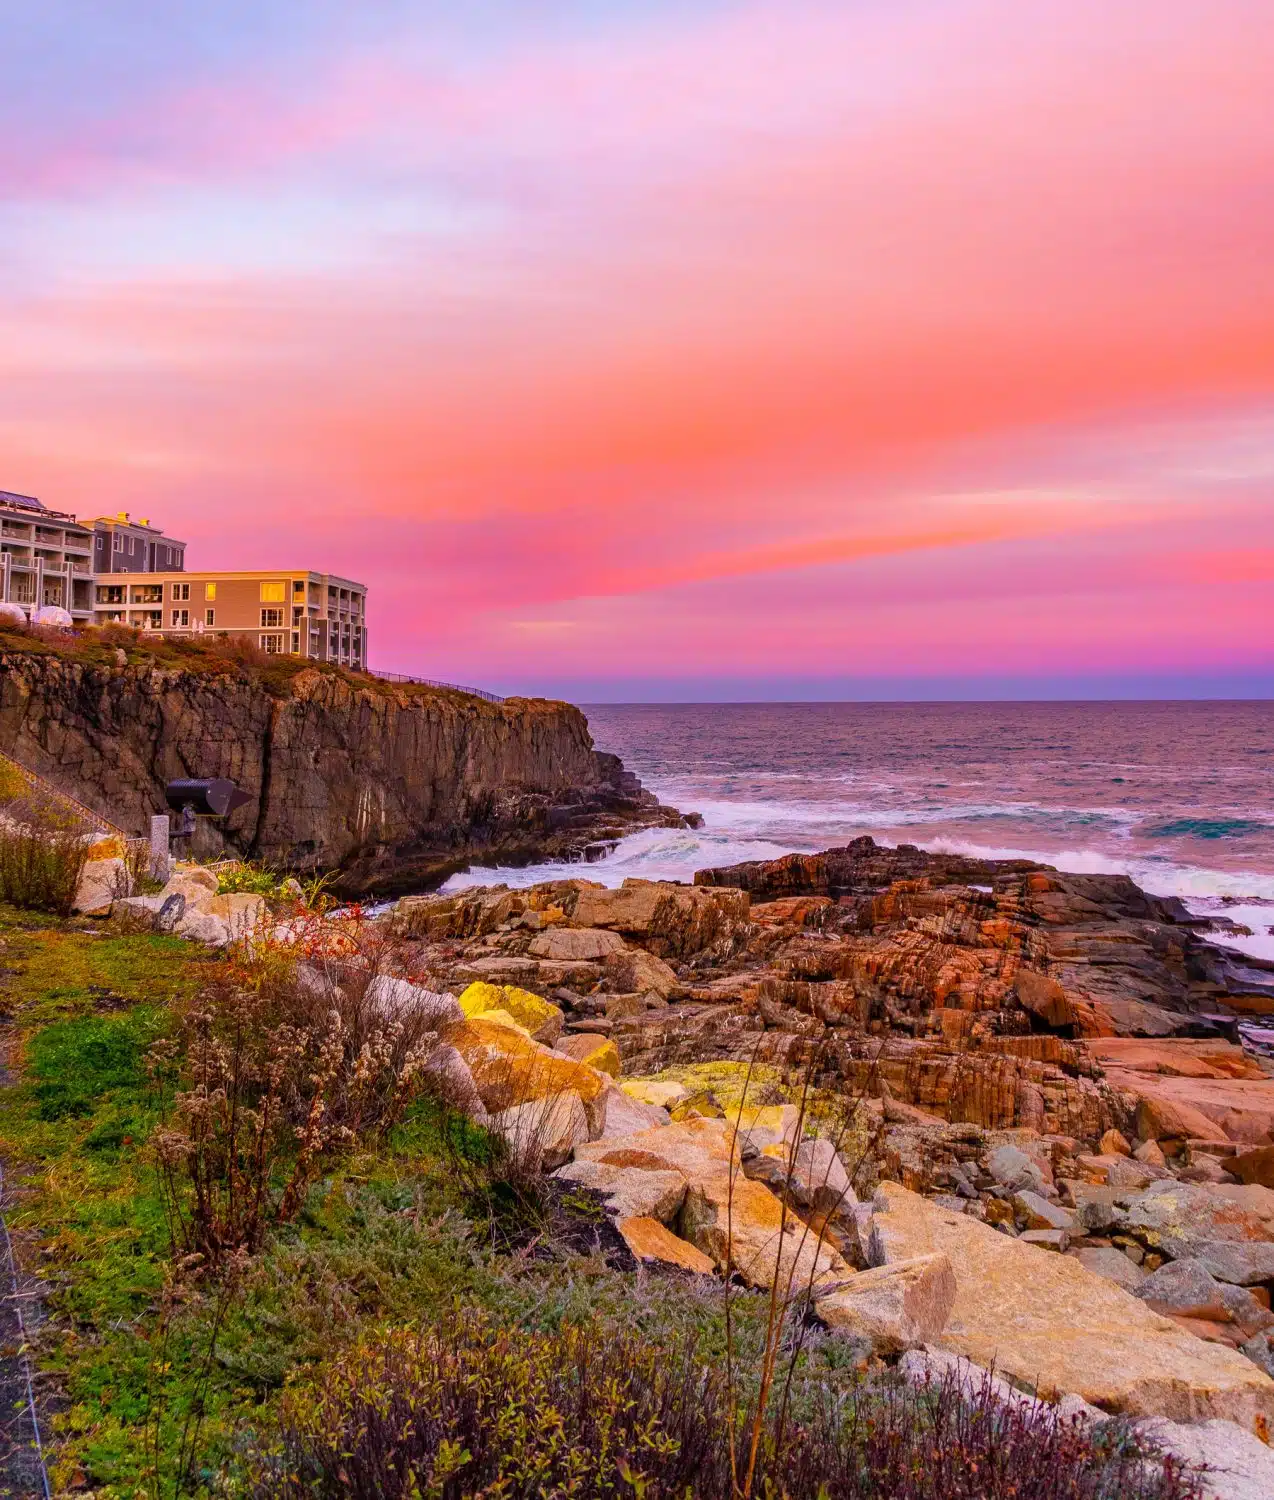 Would you like to stay at Cliff House, Maine?